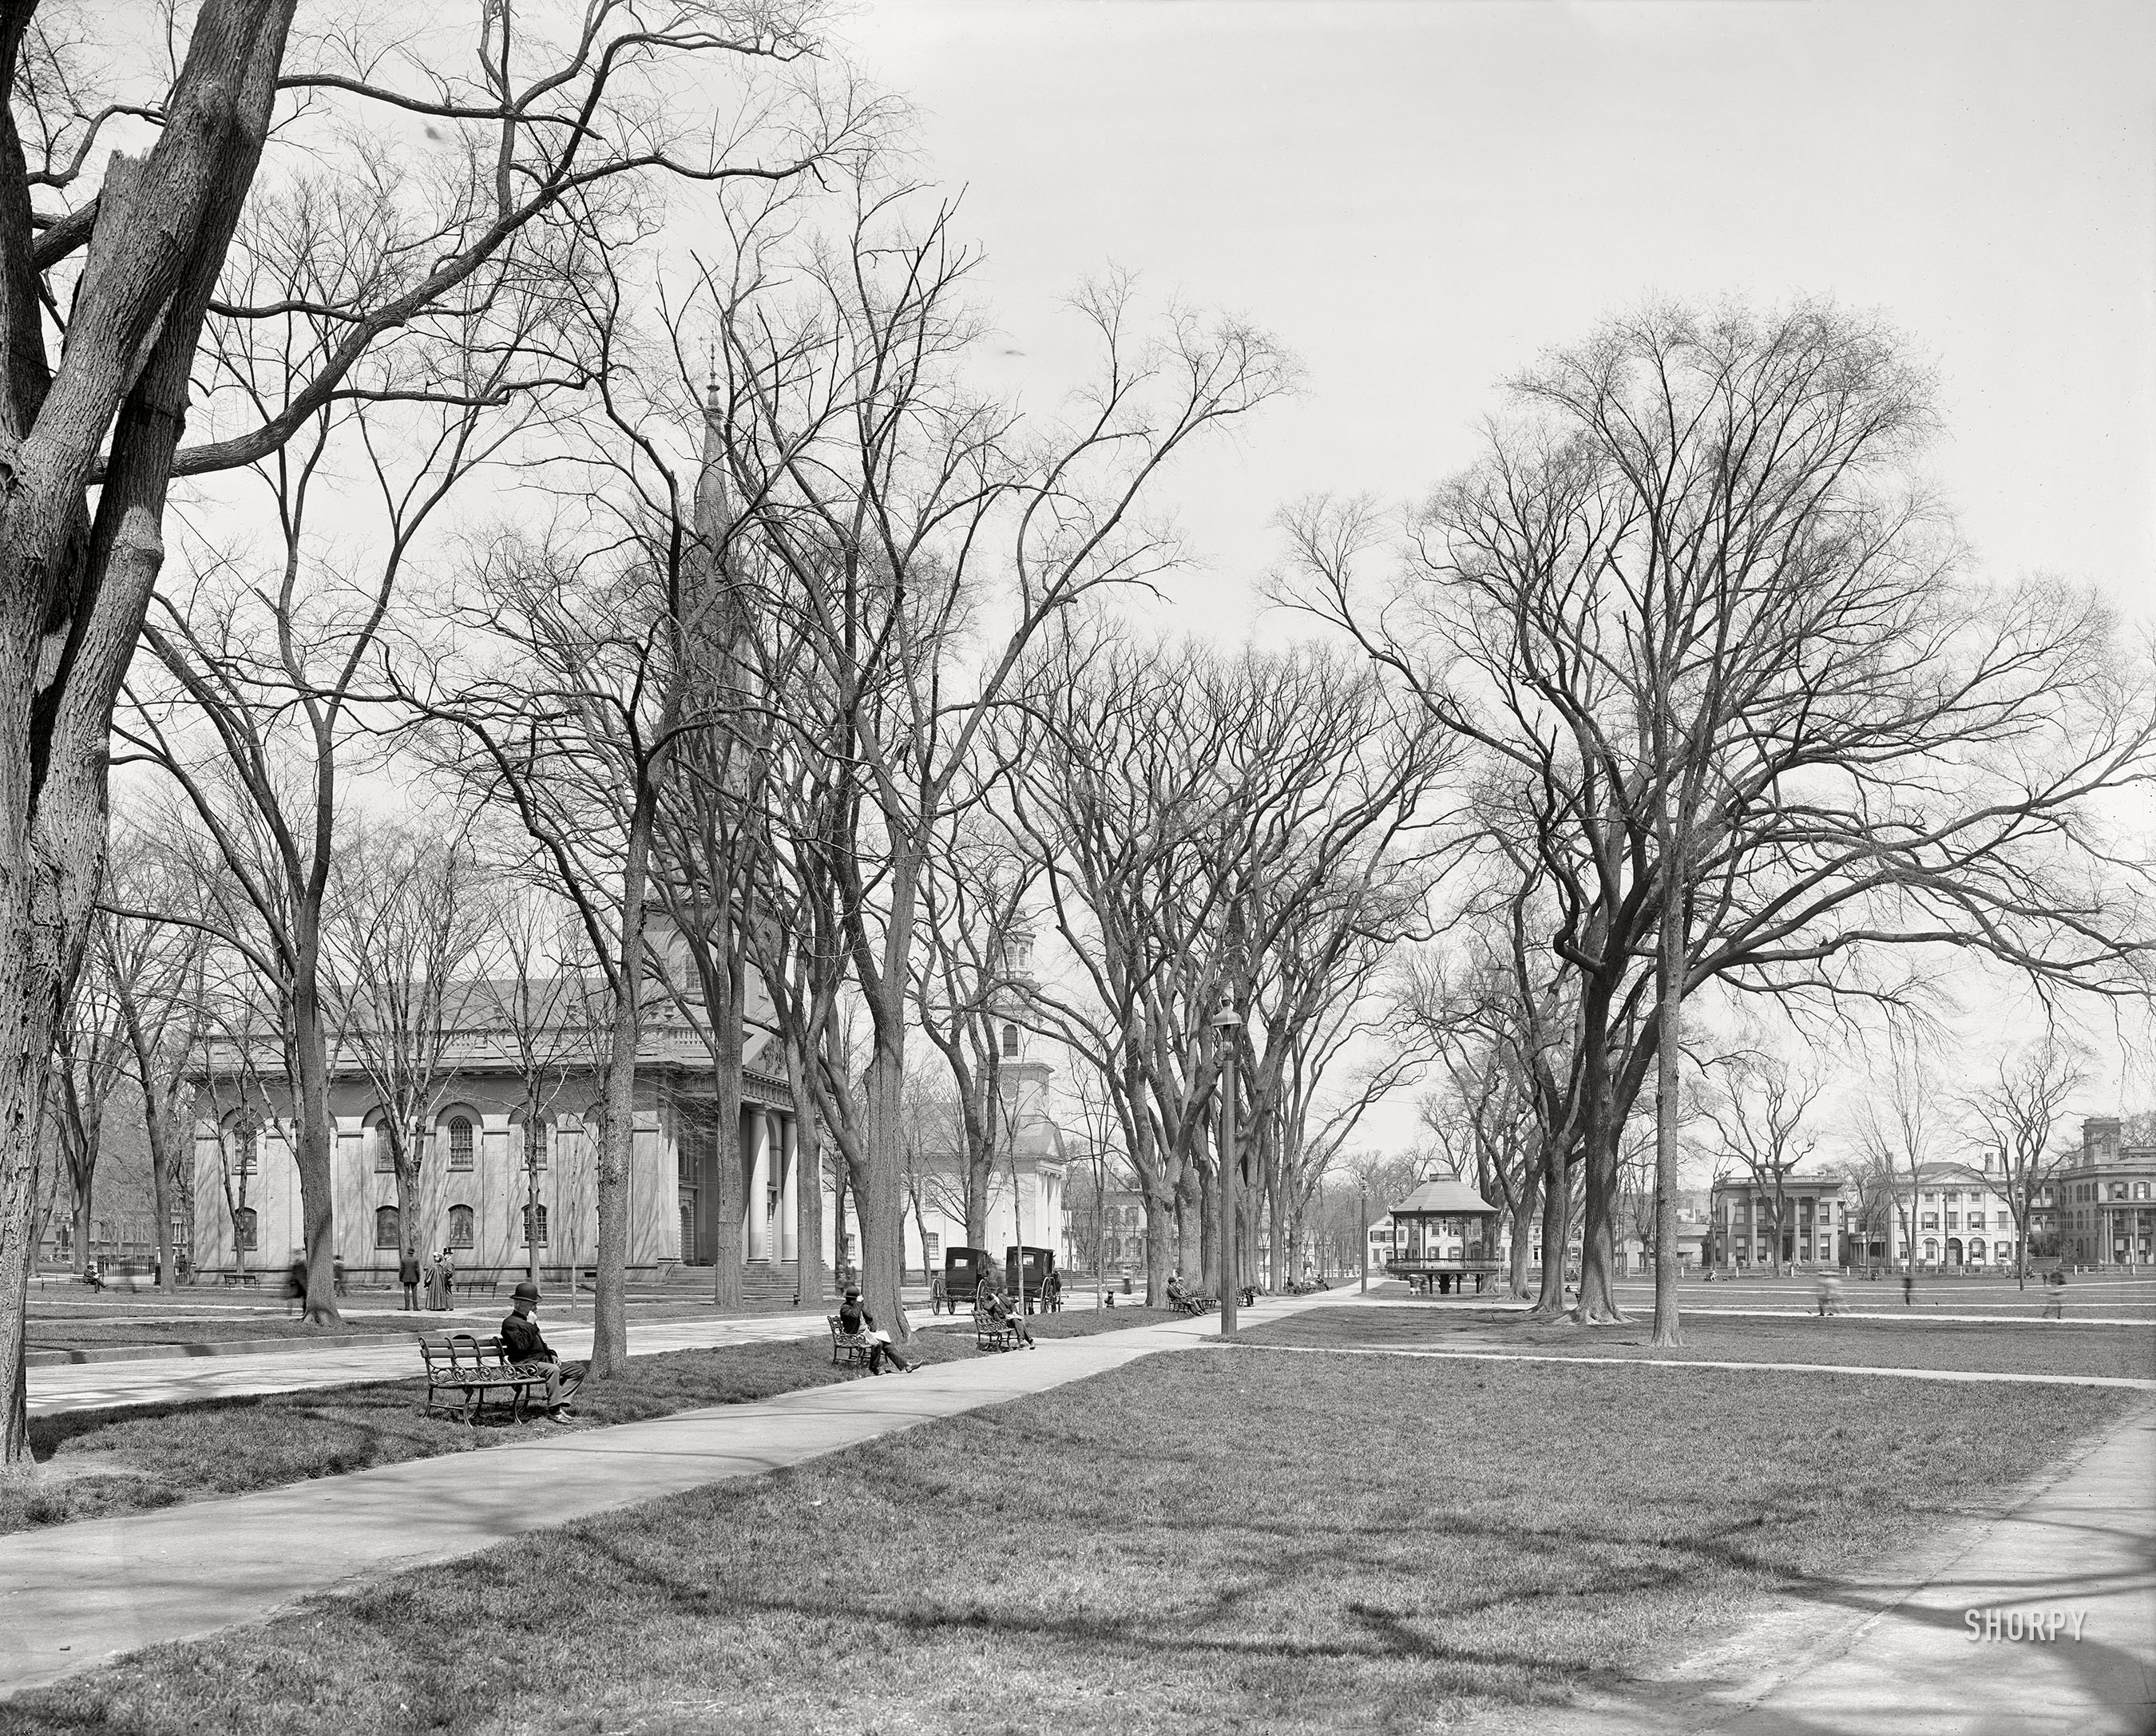 New Haven, Connecticut, circa 1900. "Temple Street and churches on the Green." 8x10 inch dry plate glass negative, Detroit Photographic Company. View full size.